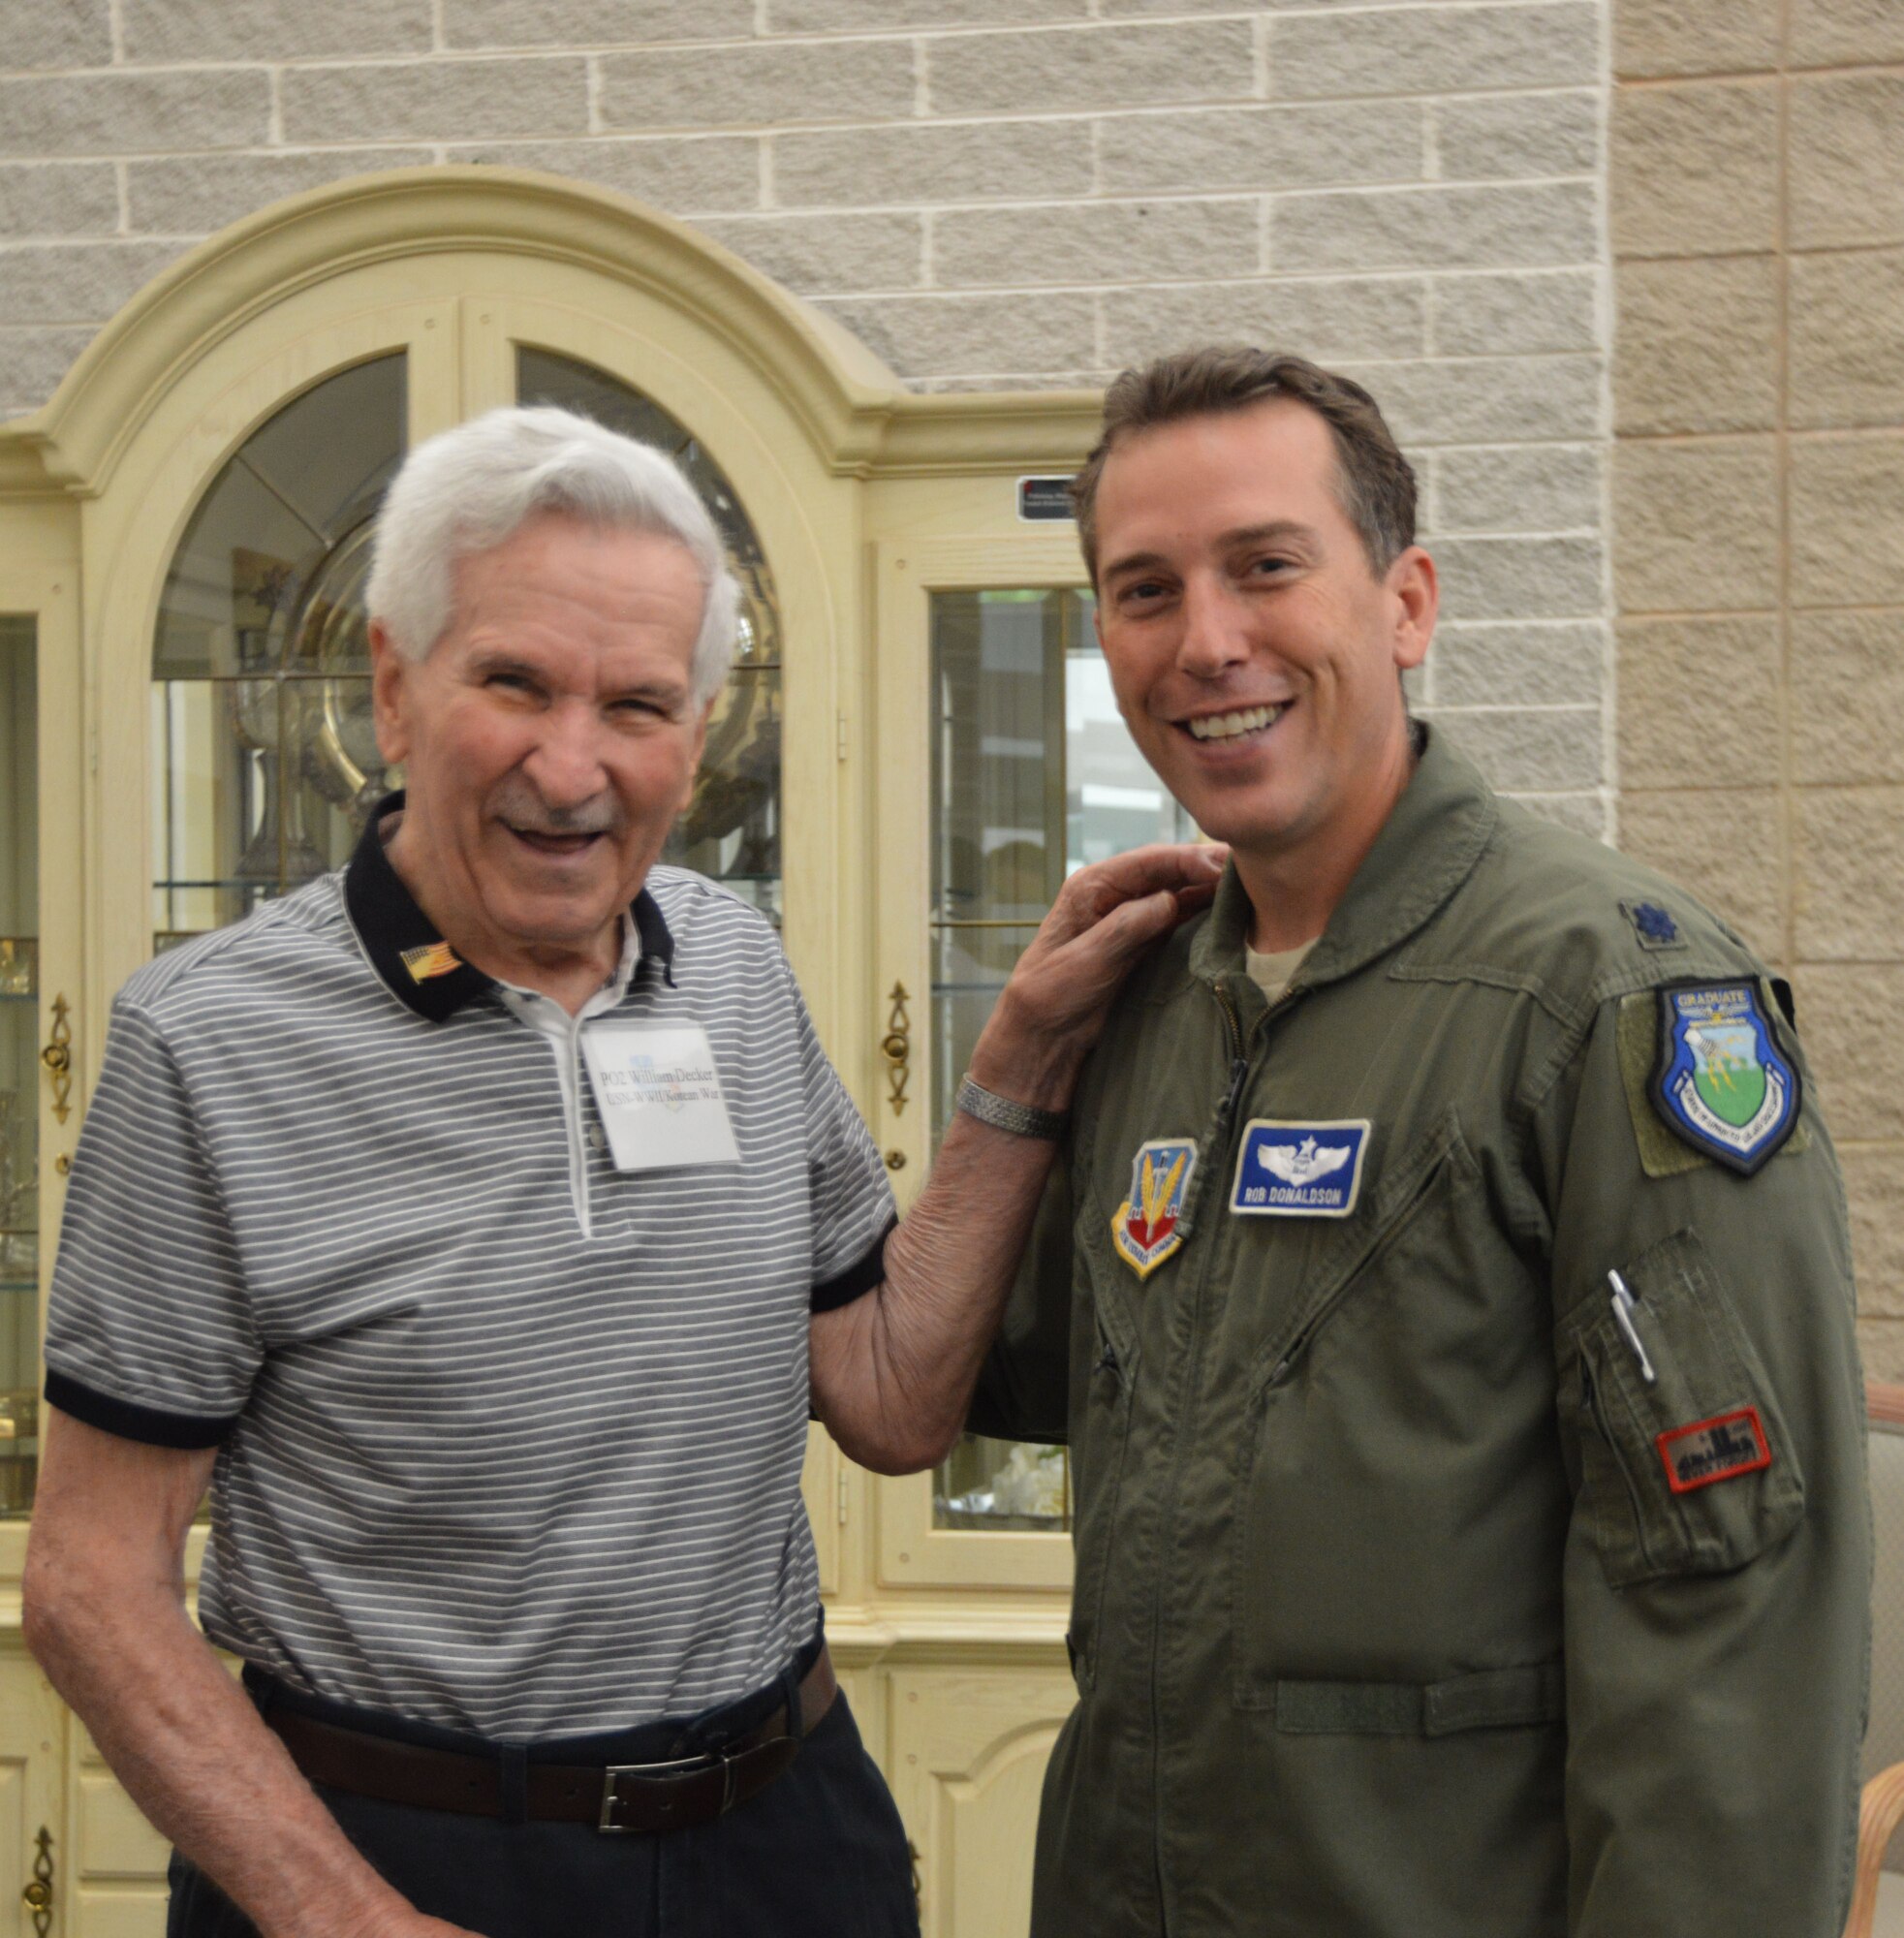 William Decker, a former Navy Petty Officer Second Class who served during World War II, shares a laugh with his military escort,  Lt. Col. Robert Donaldson of  the Air Forces Northern Commander's Action Group. (Photo by Mary McHale)